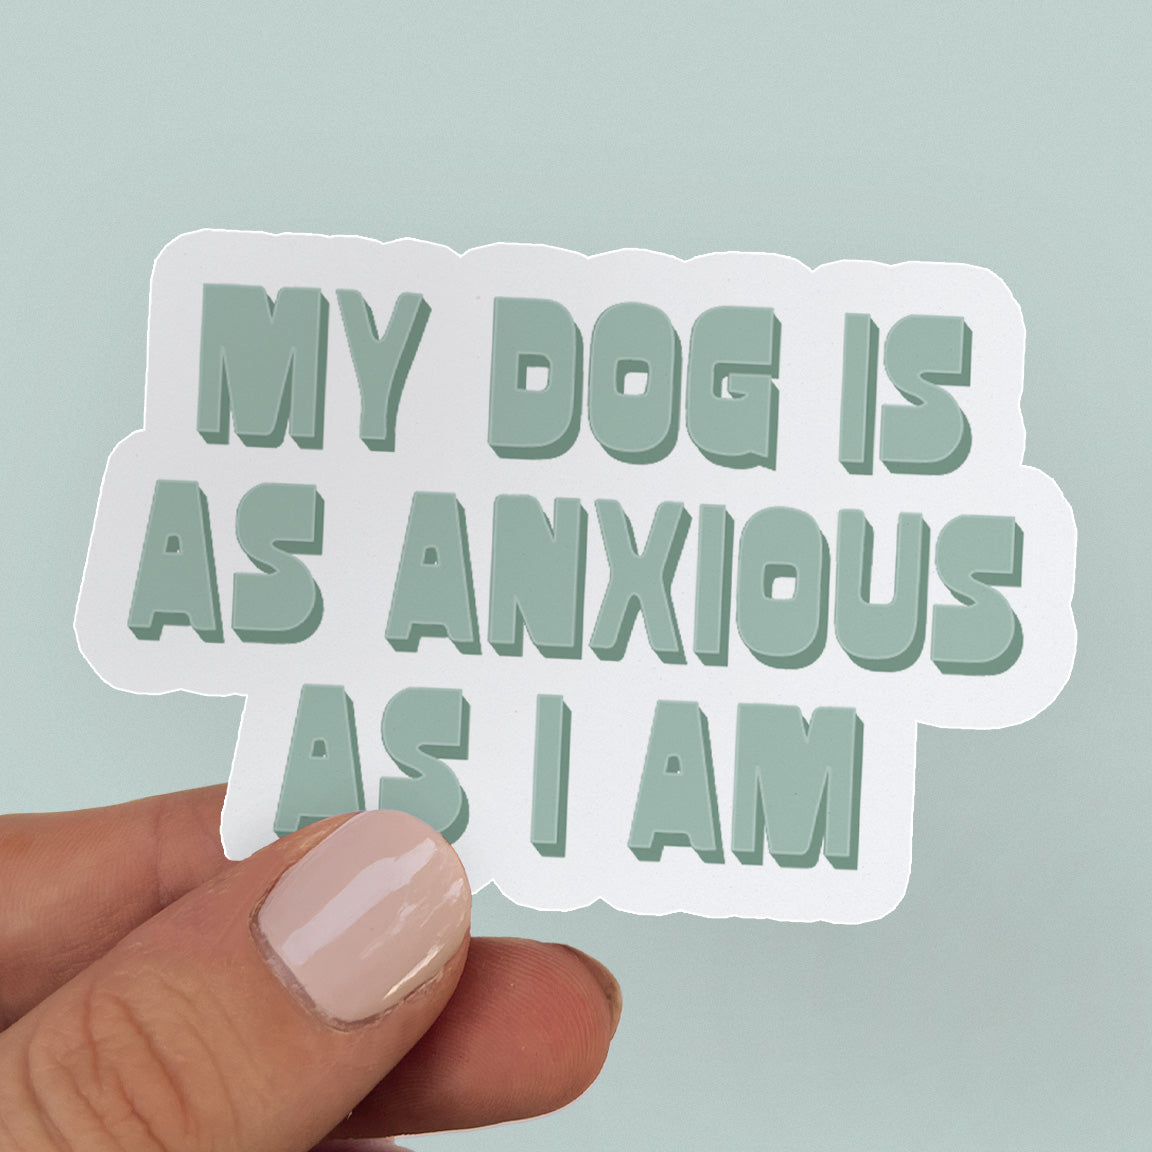 Sticker saying "My Dog is As Anxious as I am" 